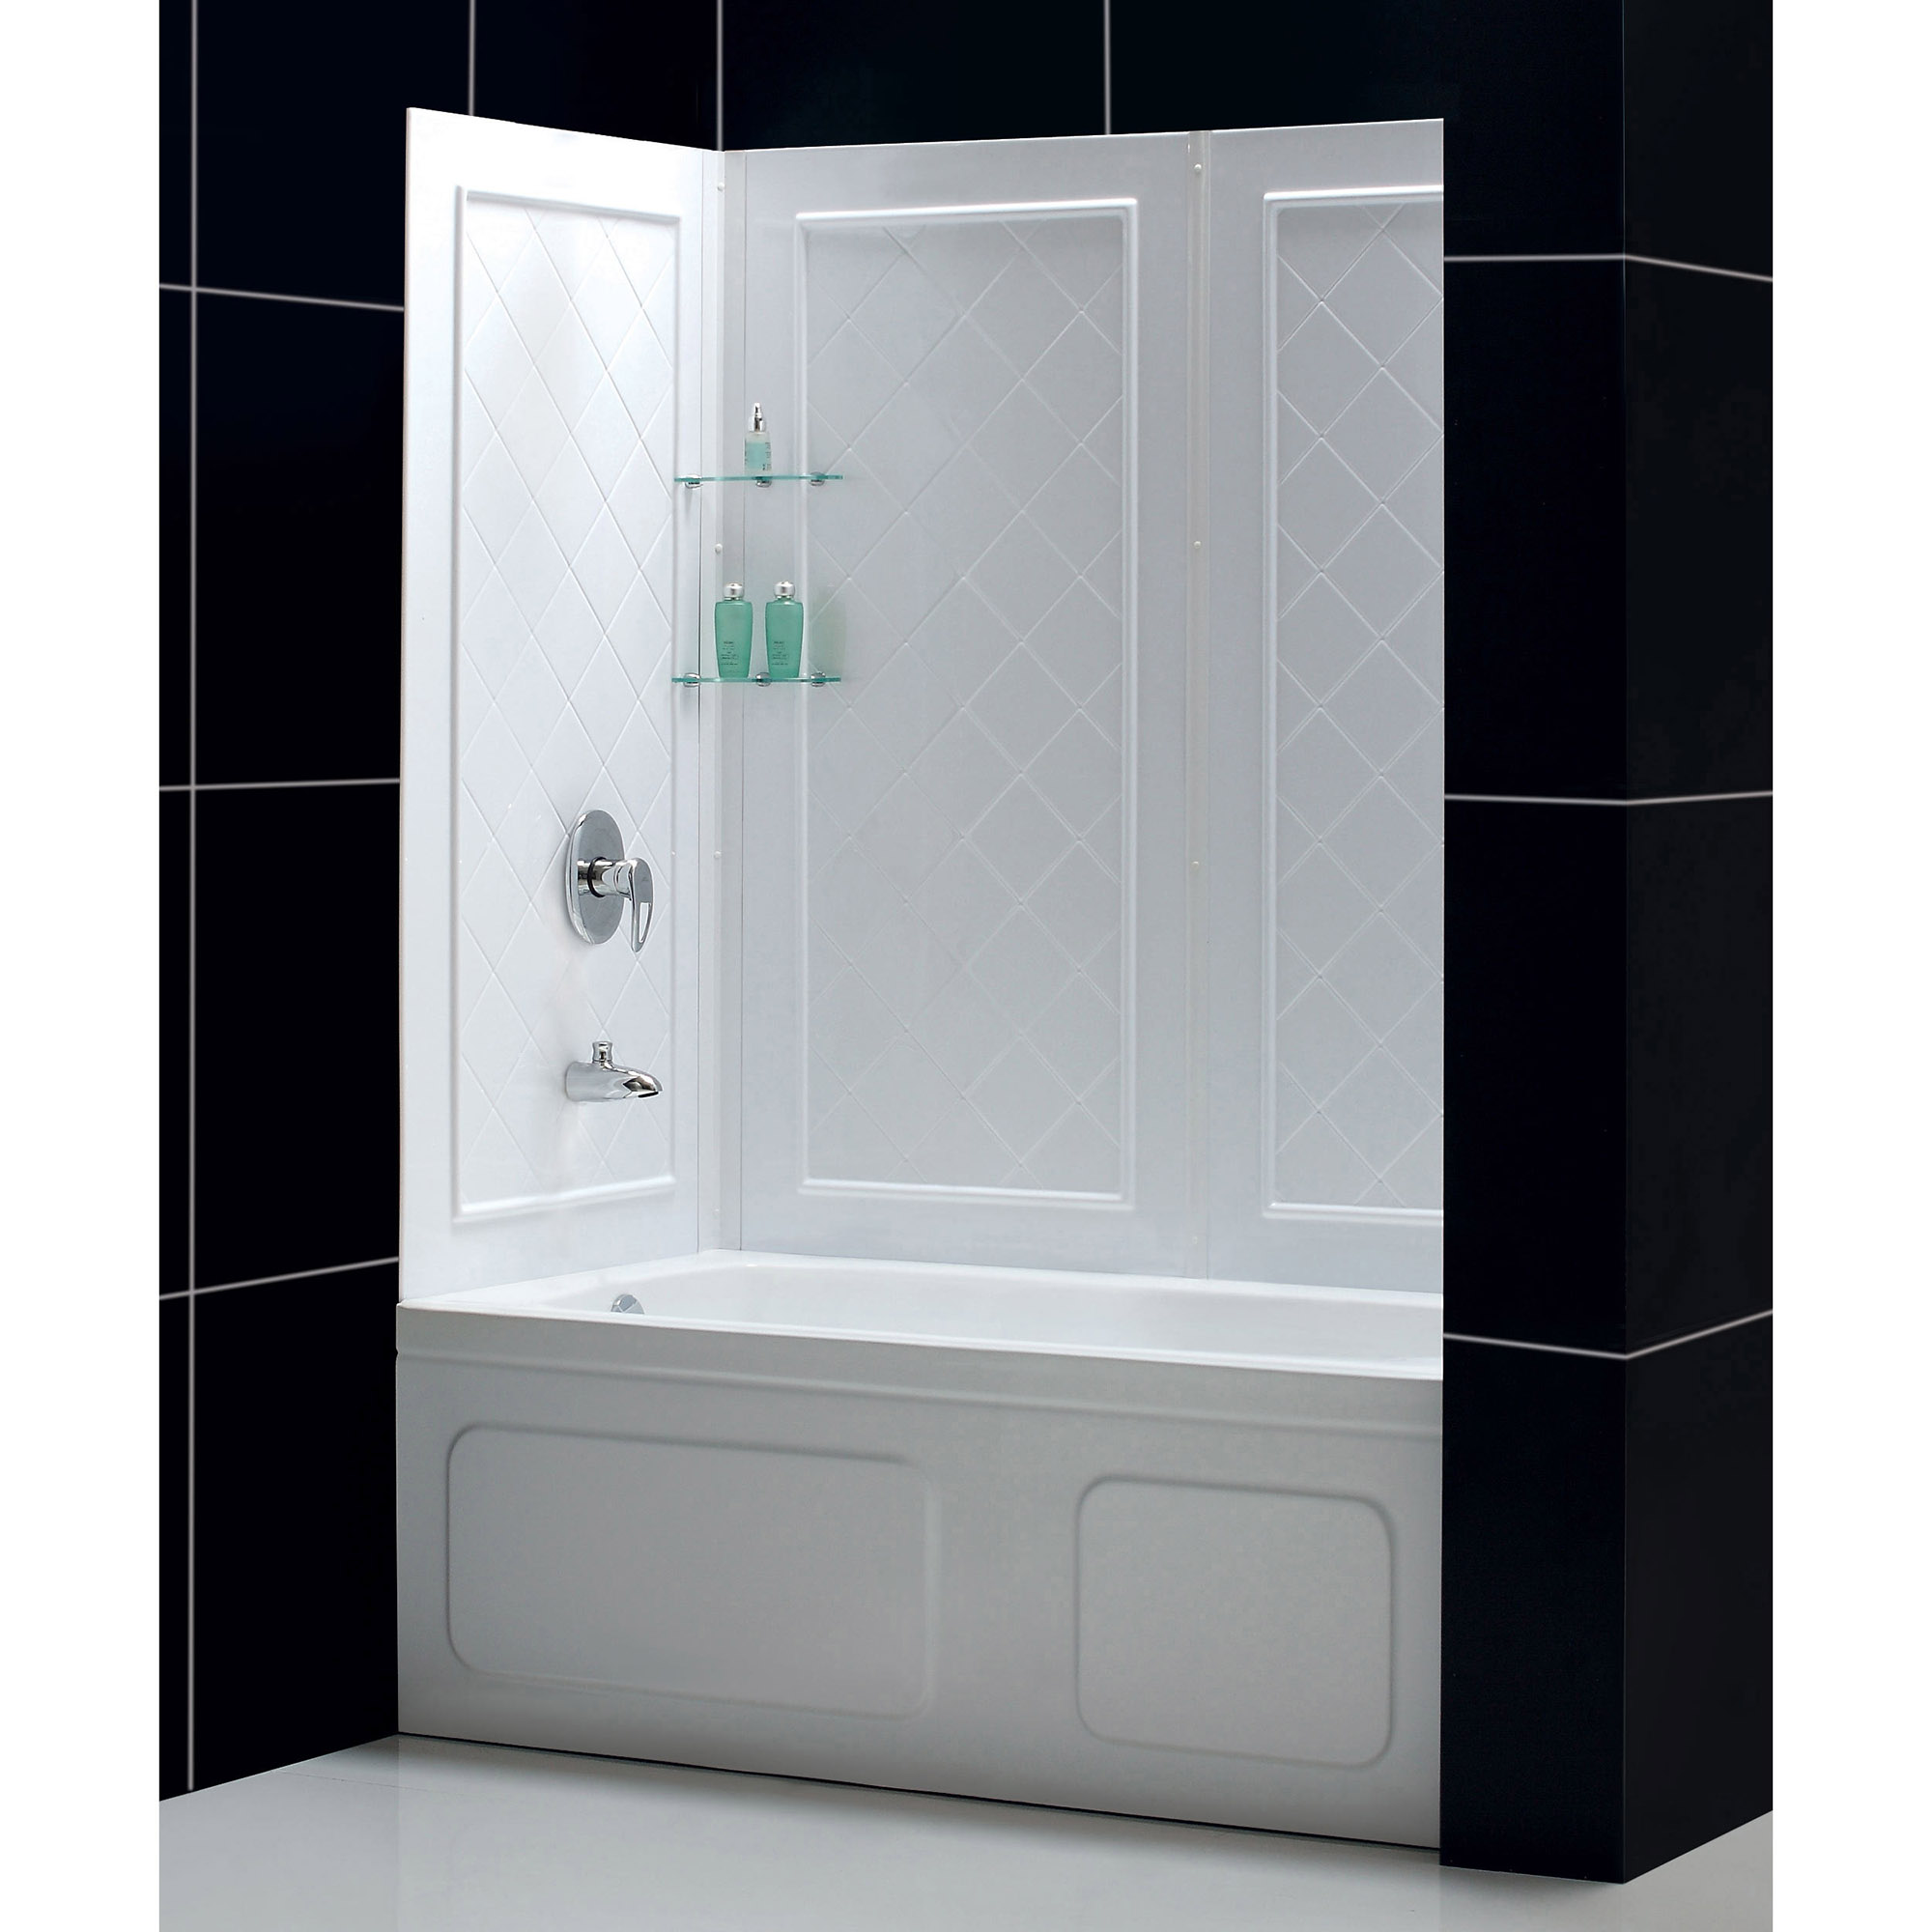 DreamLine Infinity-Z 56-60 in. W x 60 in. H Clear Sliding Tub Door in Brushed Nickel with White Acrylic Backwall Kit - image 10 of 14